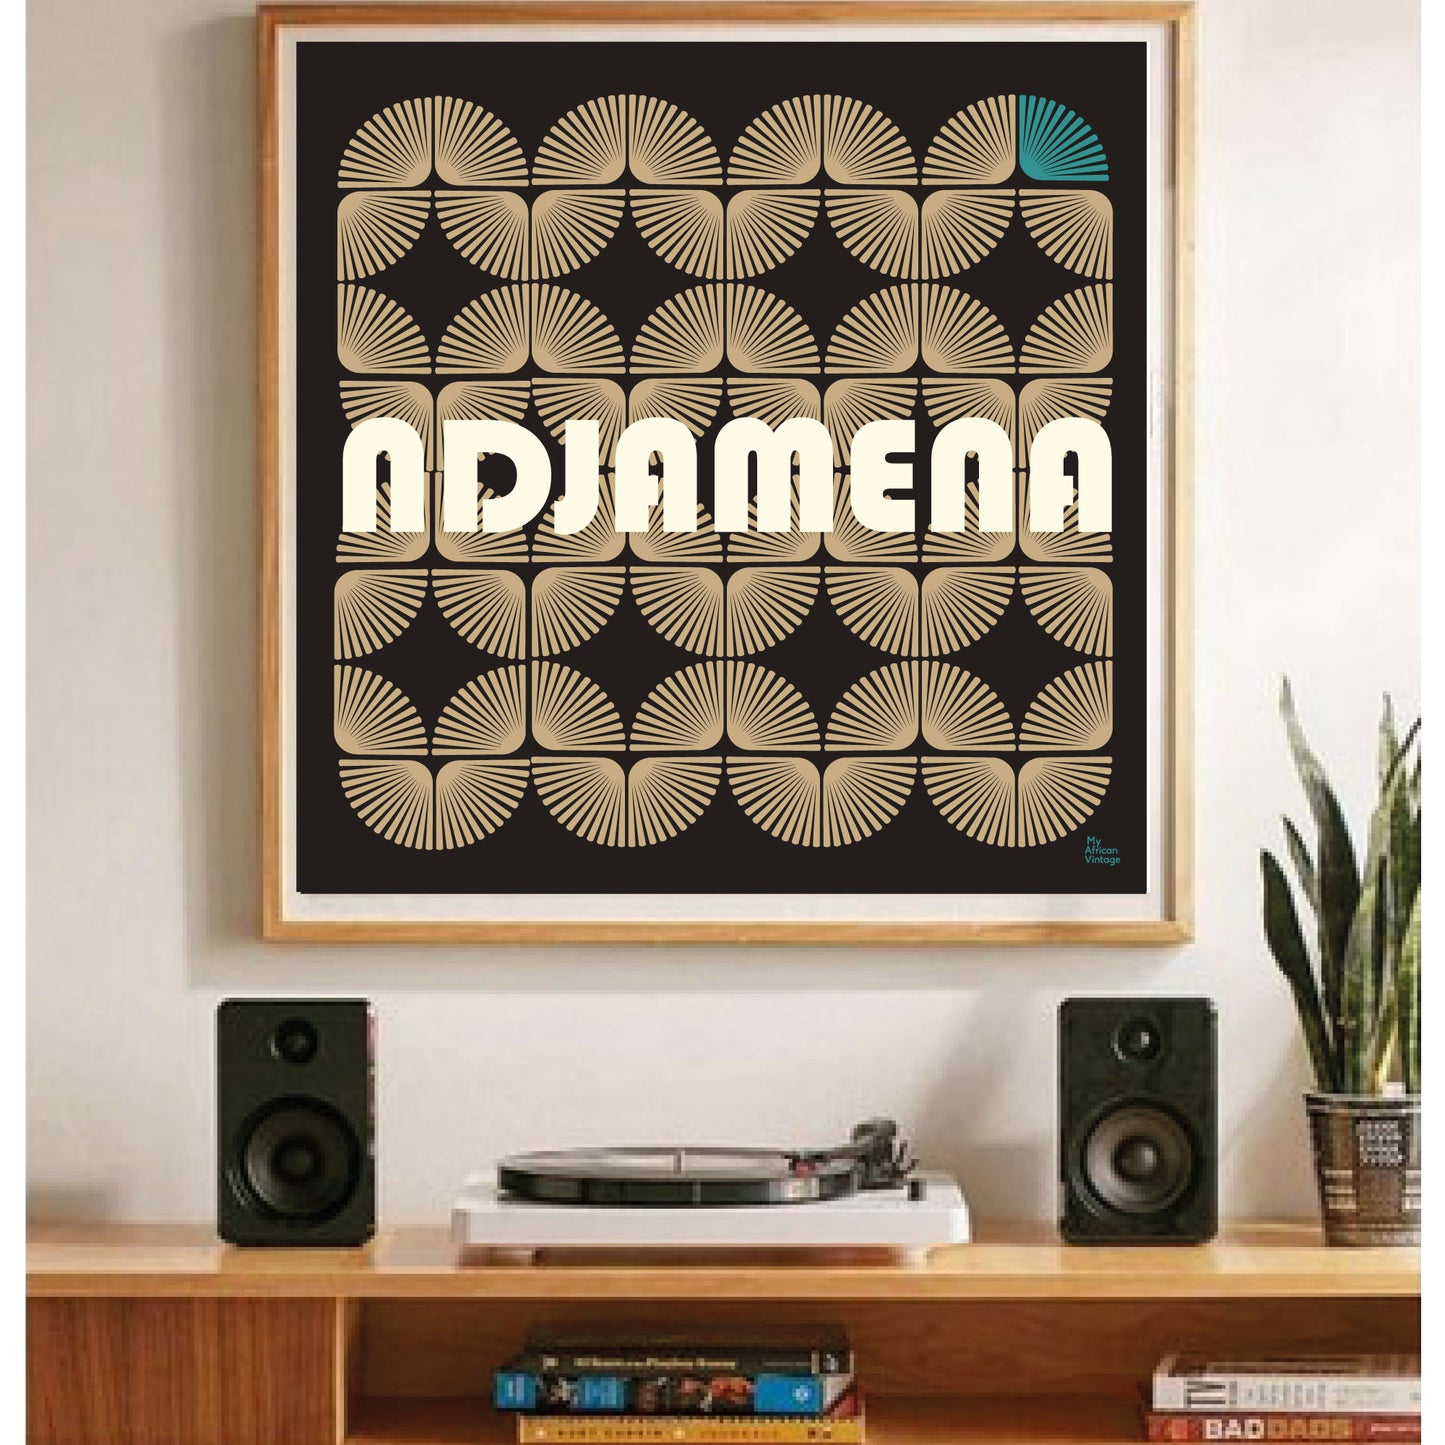 Retro style poster "Ndjamena" - collection "My African Vintage"